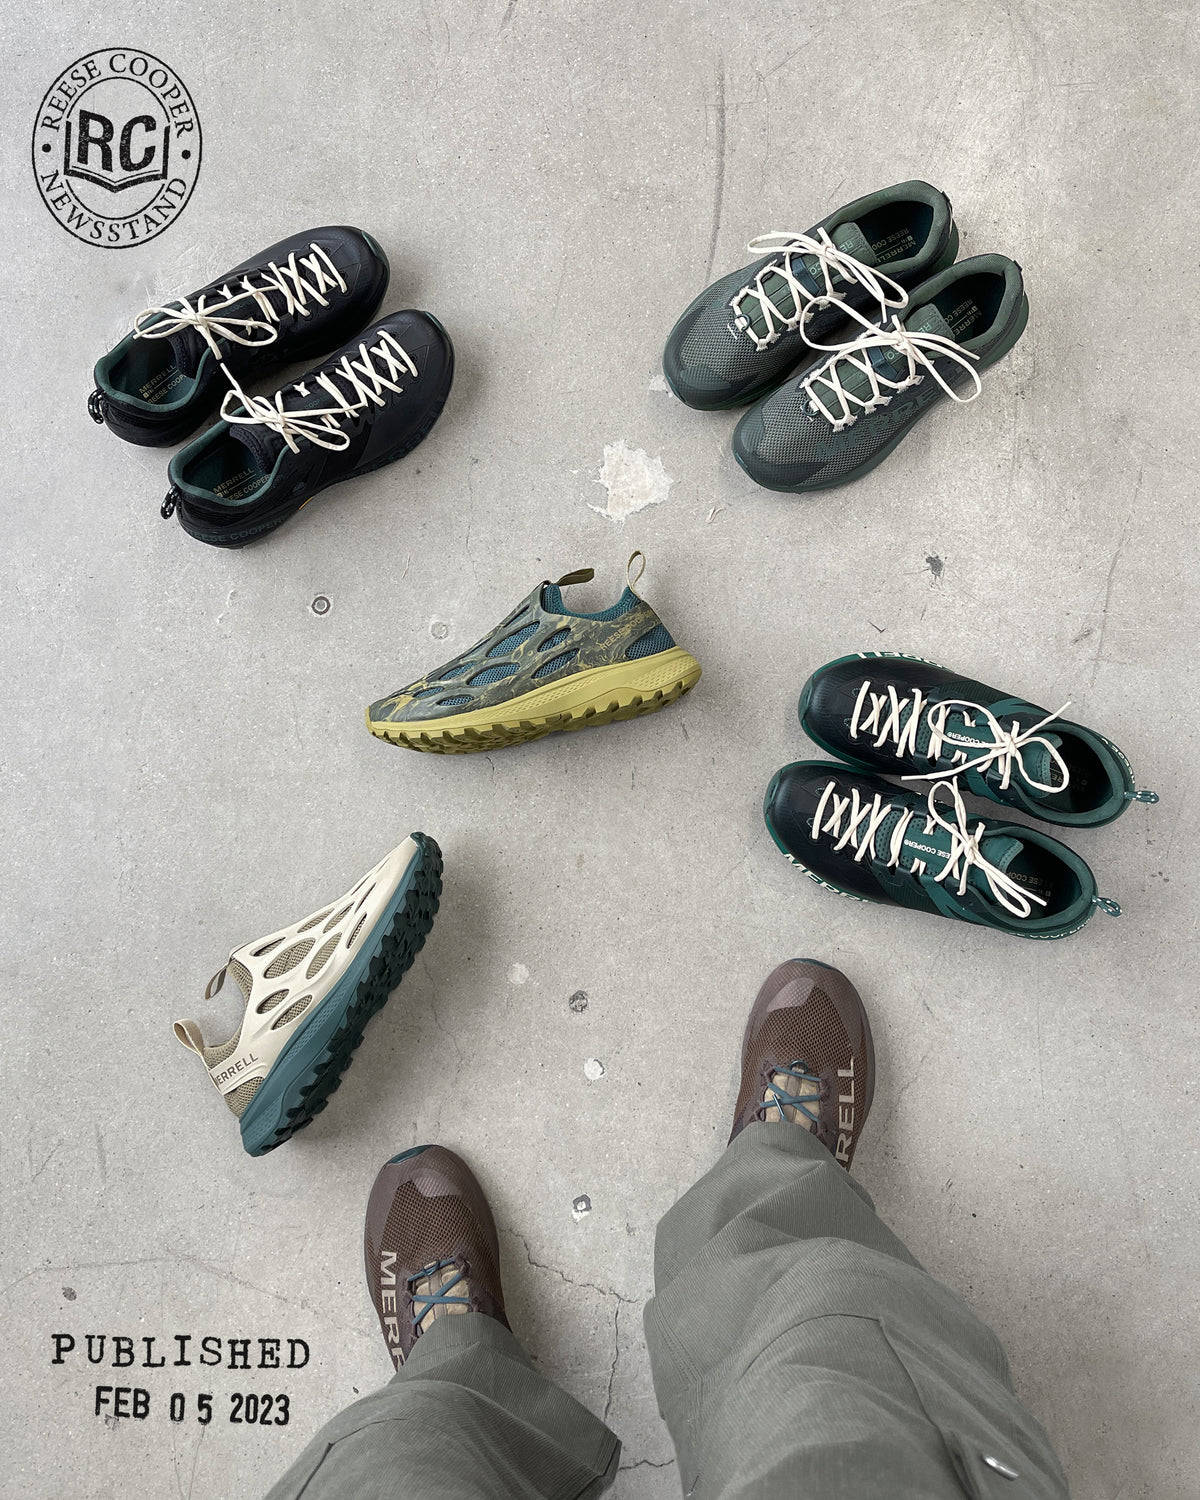 Upcoming Releases: RC x Merrell 1 TRL Collaboration